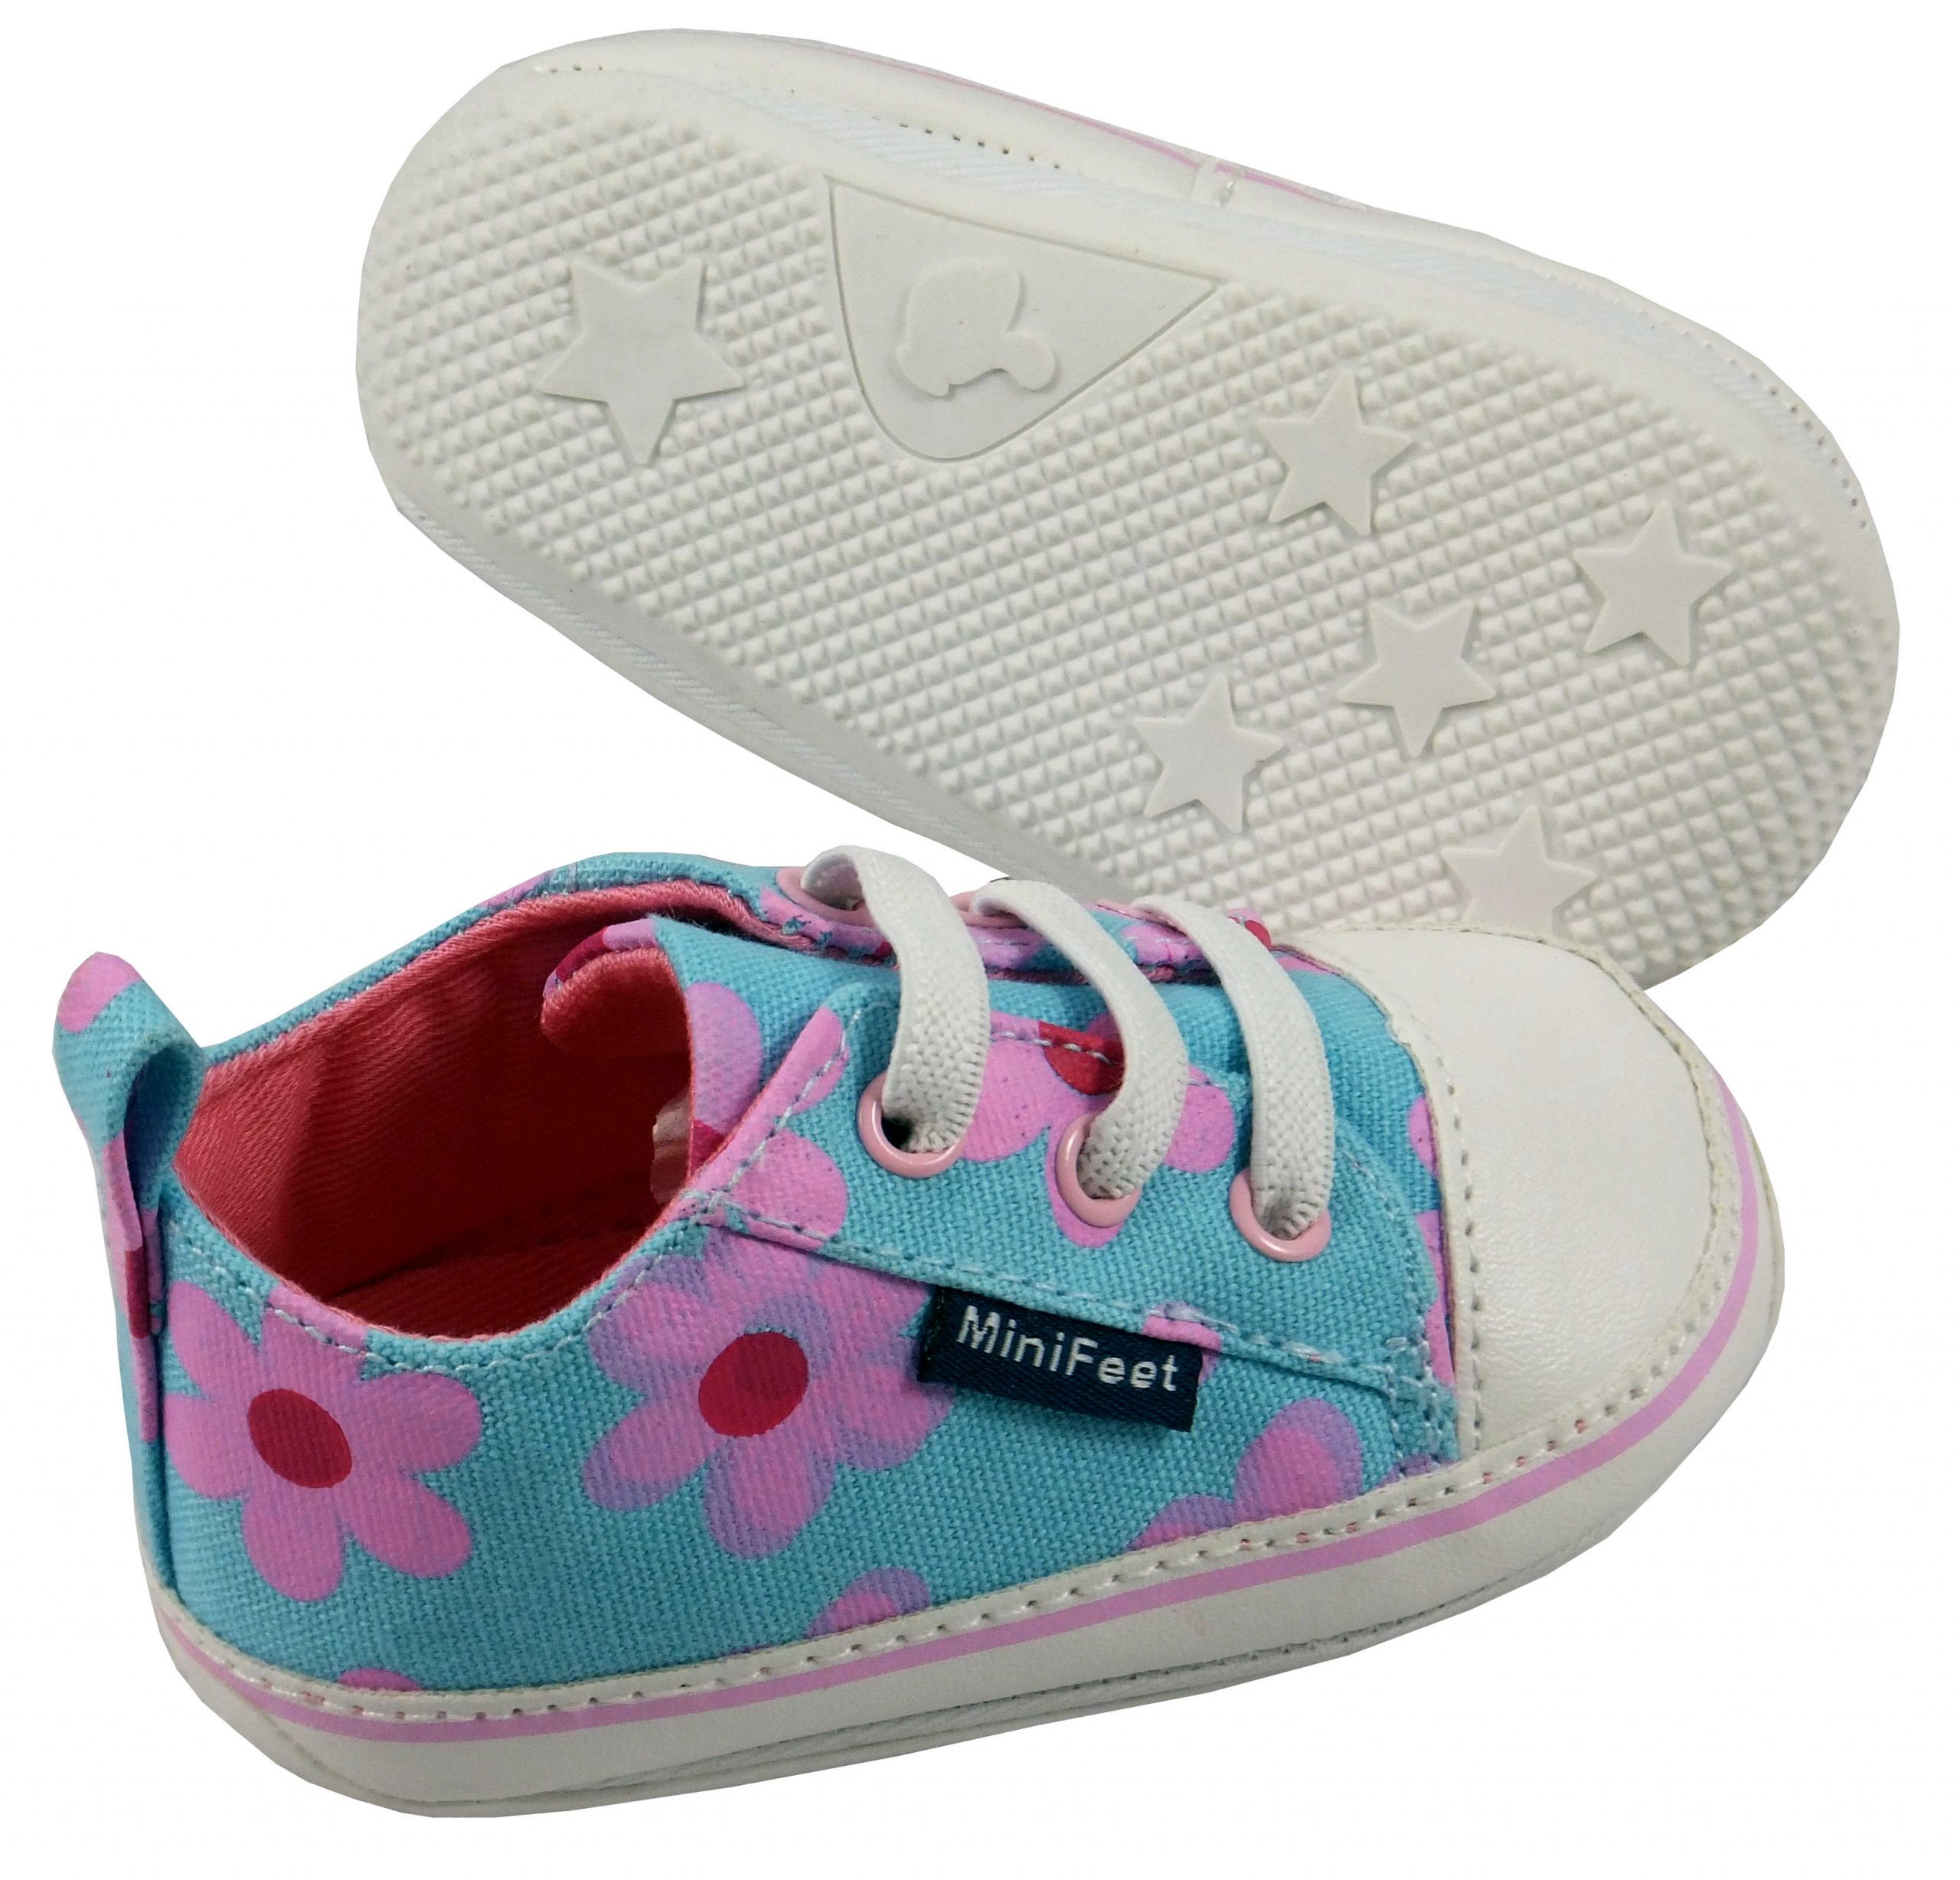 Canvas Baby Shoes Pale Blue Pink Daisies